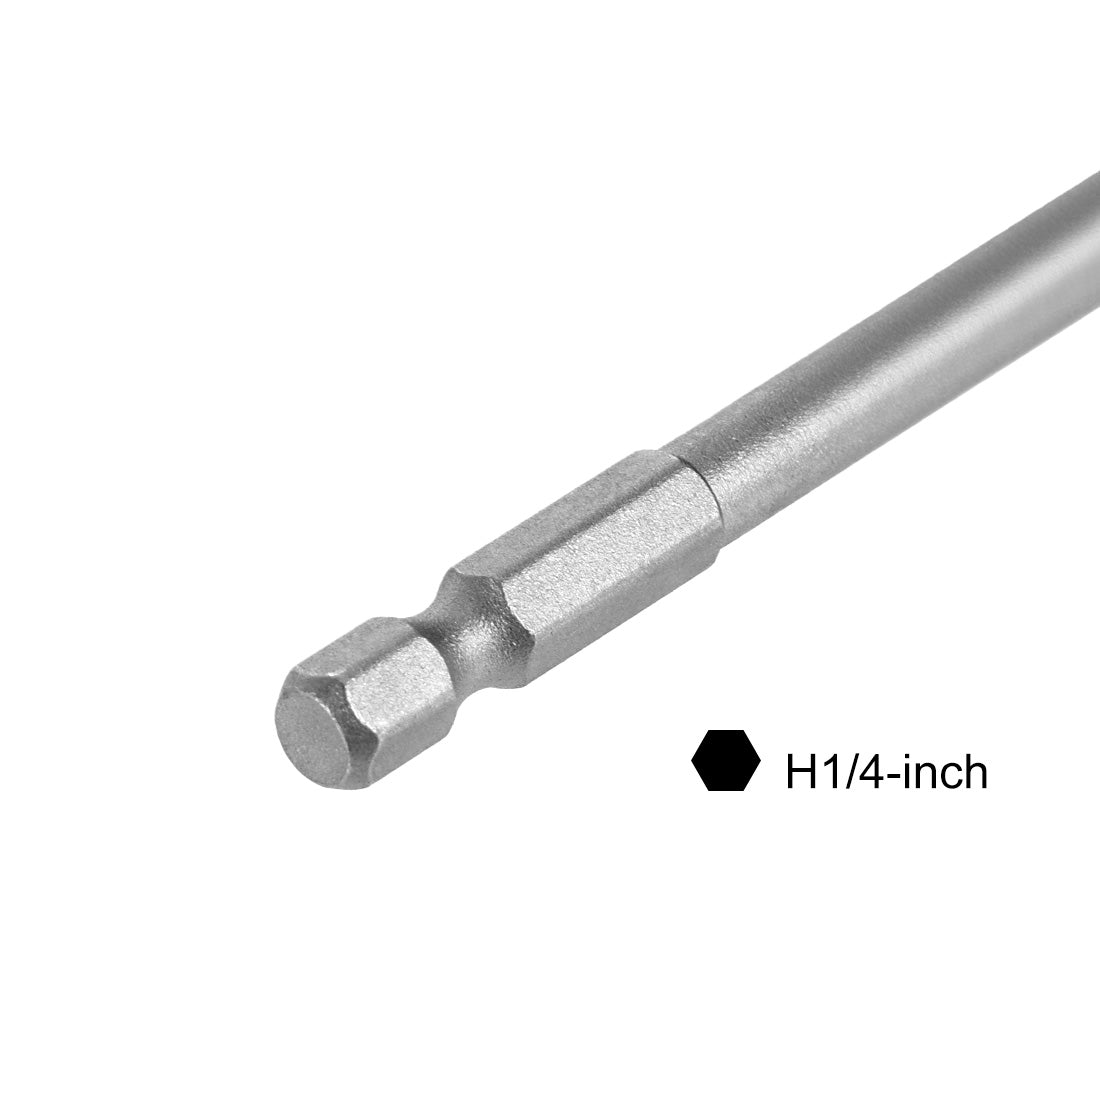 Uxcell Uxcell Torx Screwdriver Bits 1/4-Inch Hex Shank 150mm Length TT35 Magnetic Security Star Screw Driver S2 Bit